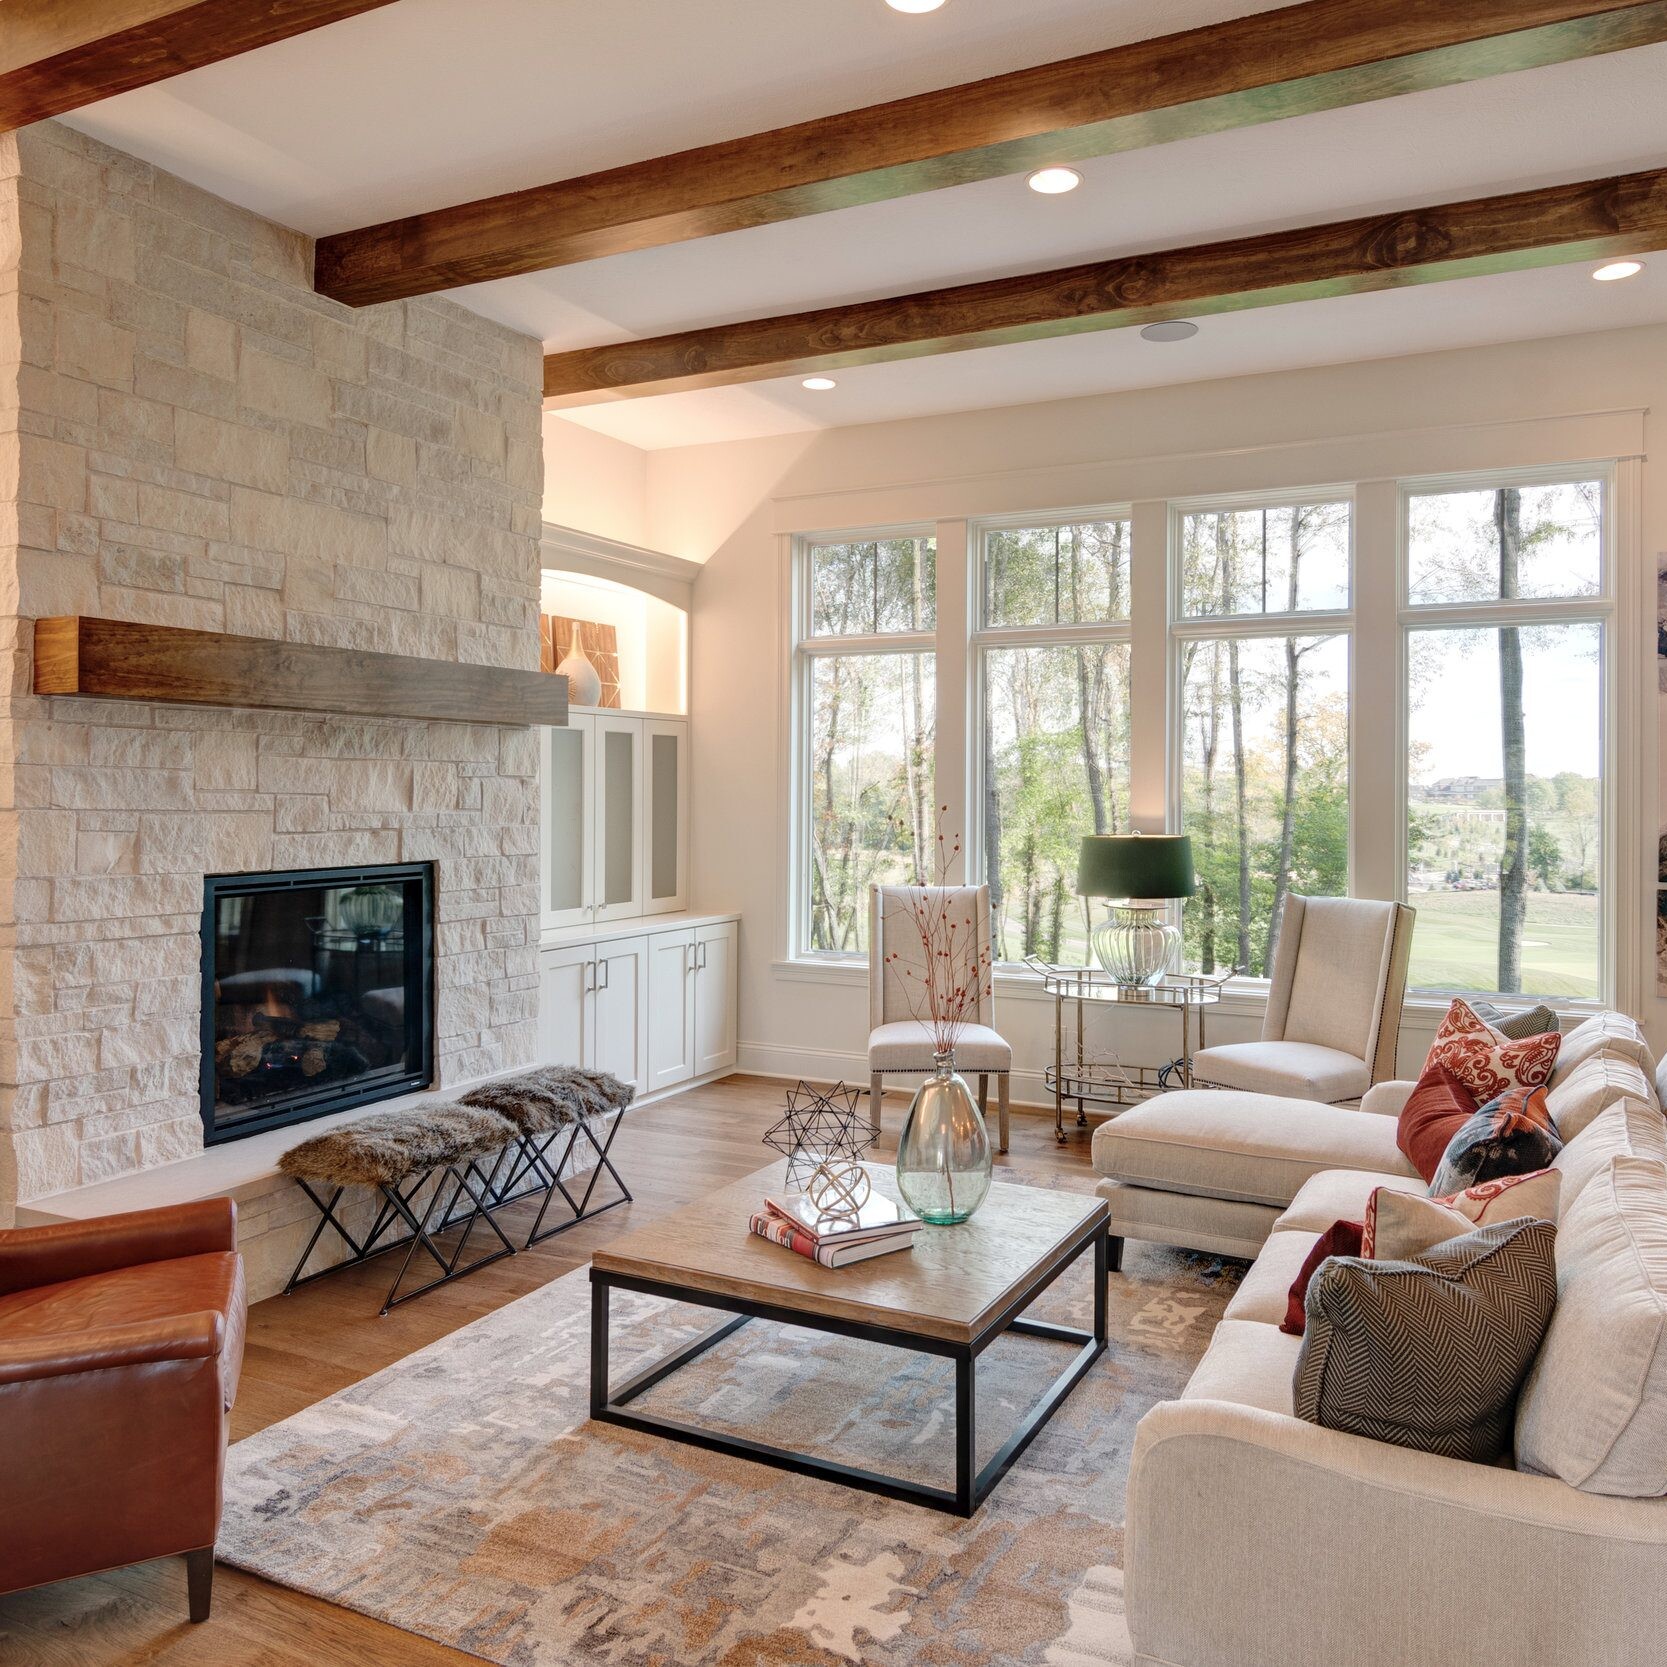 A cozy living room featuring a stone fireplace and charming wooden beams.